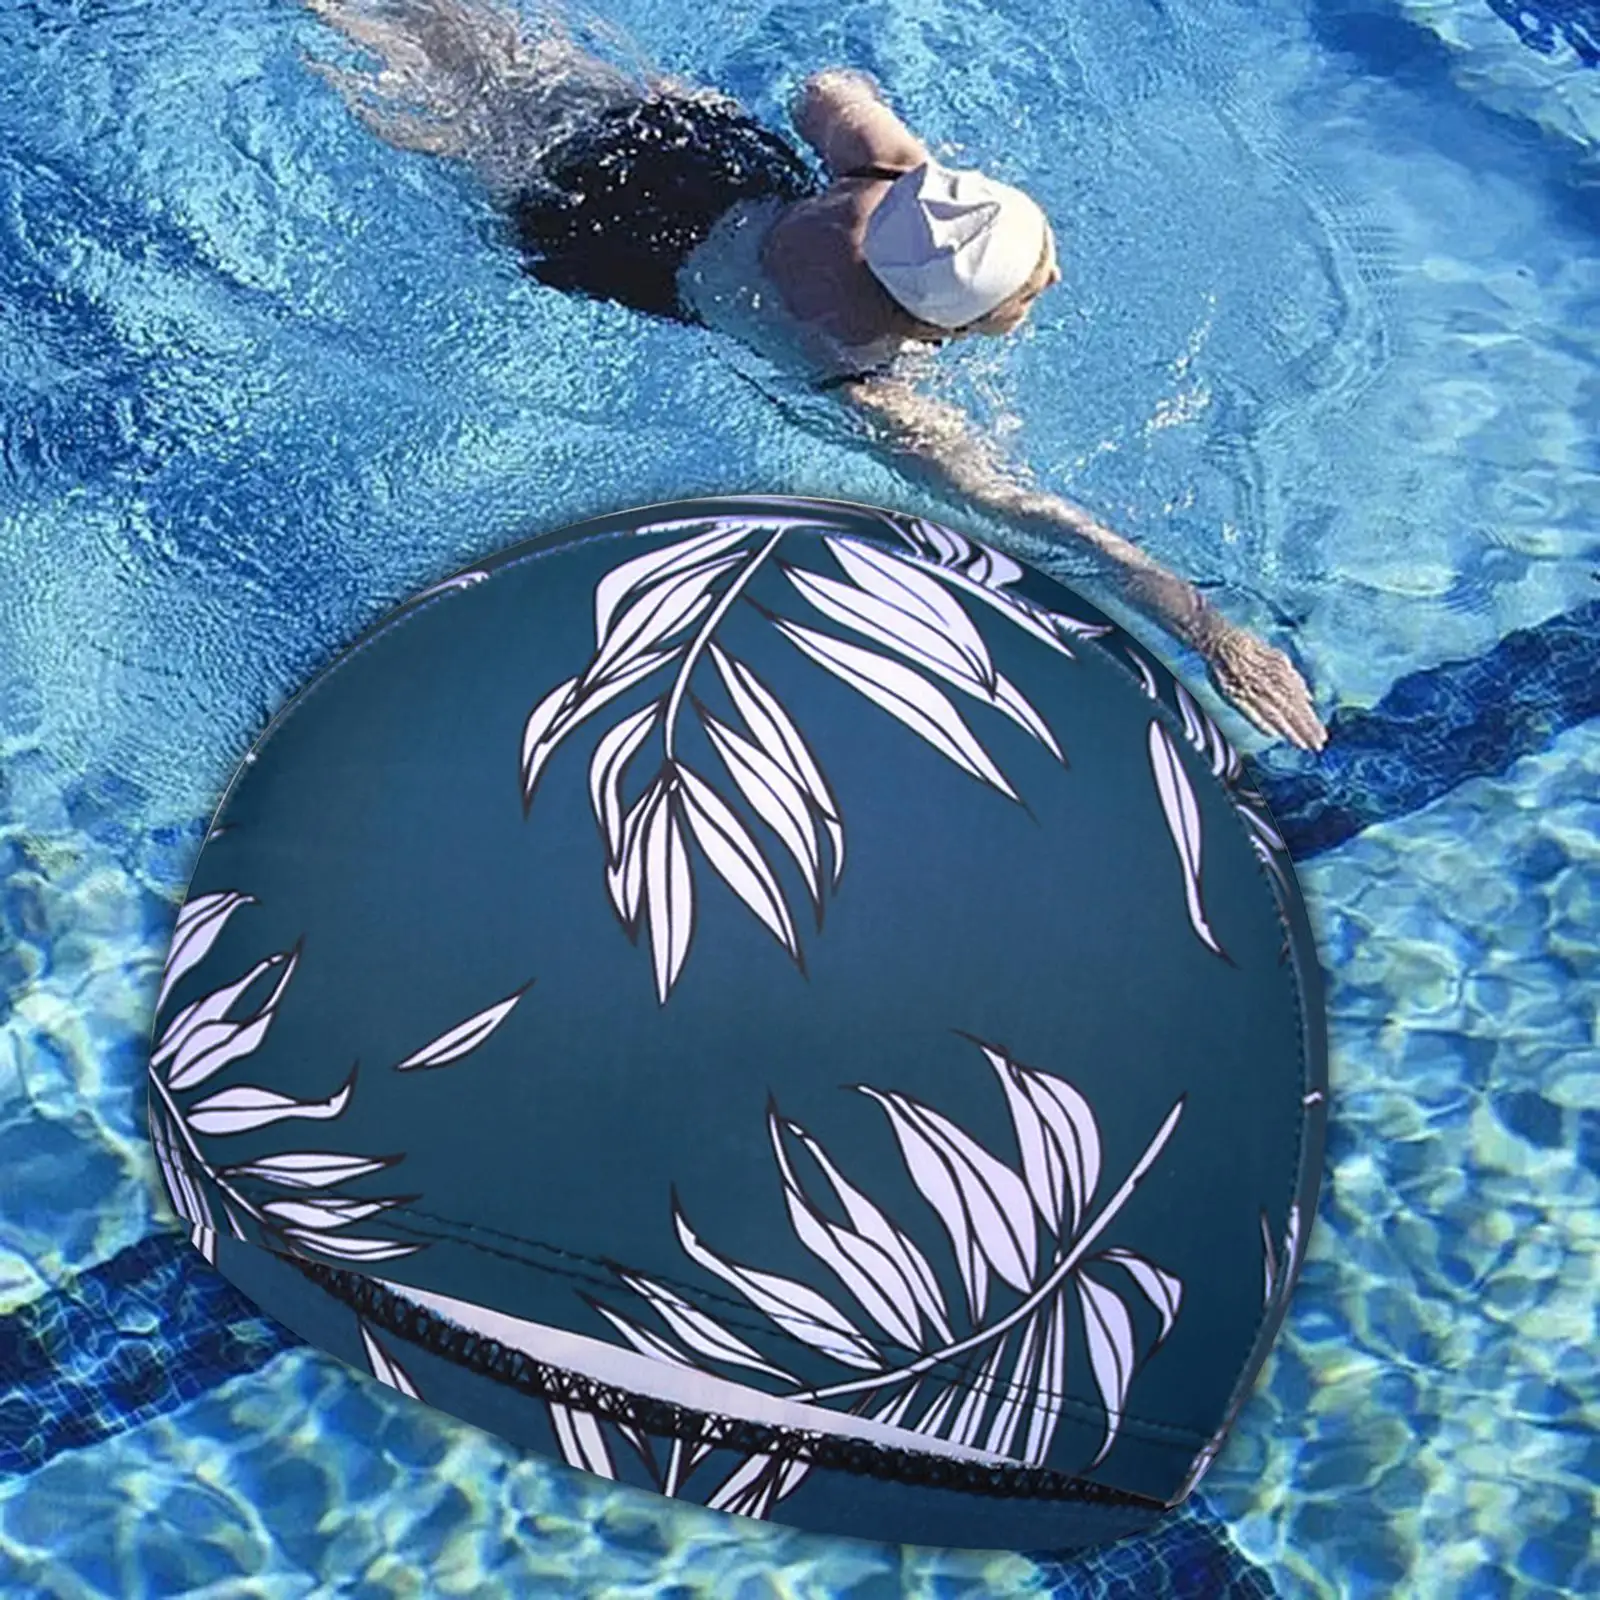 Swimming Cap Unisex Bathing Cap for Men and Women Adults Long and Short Hair